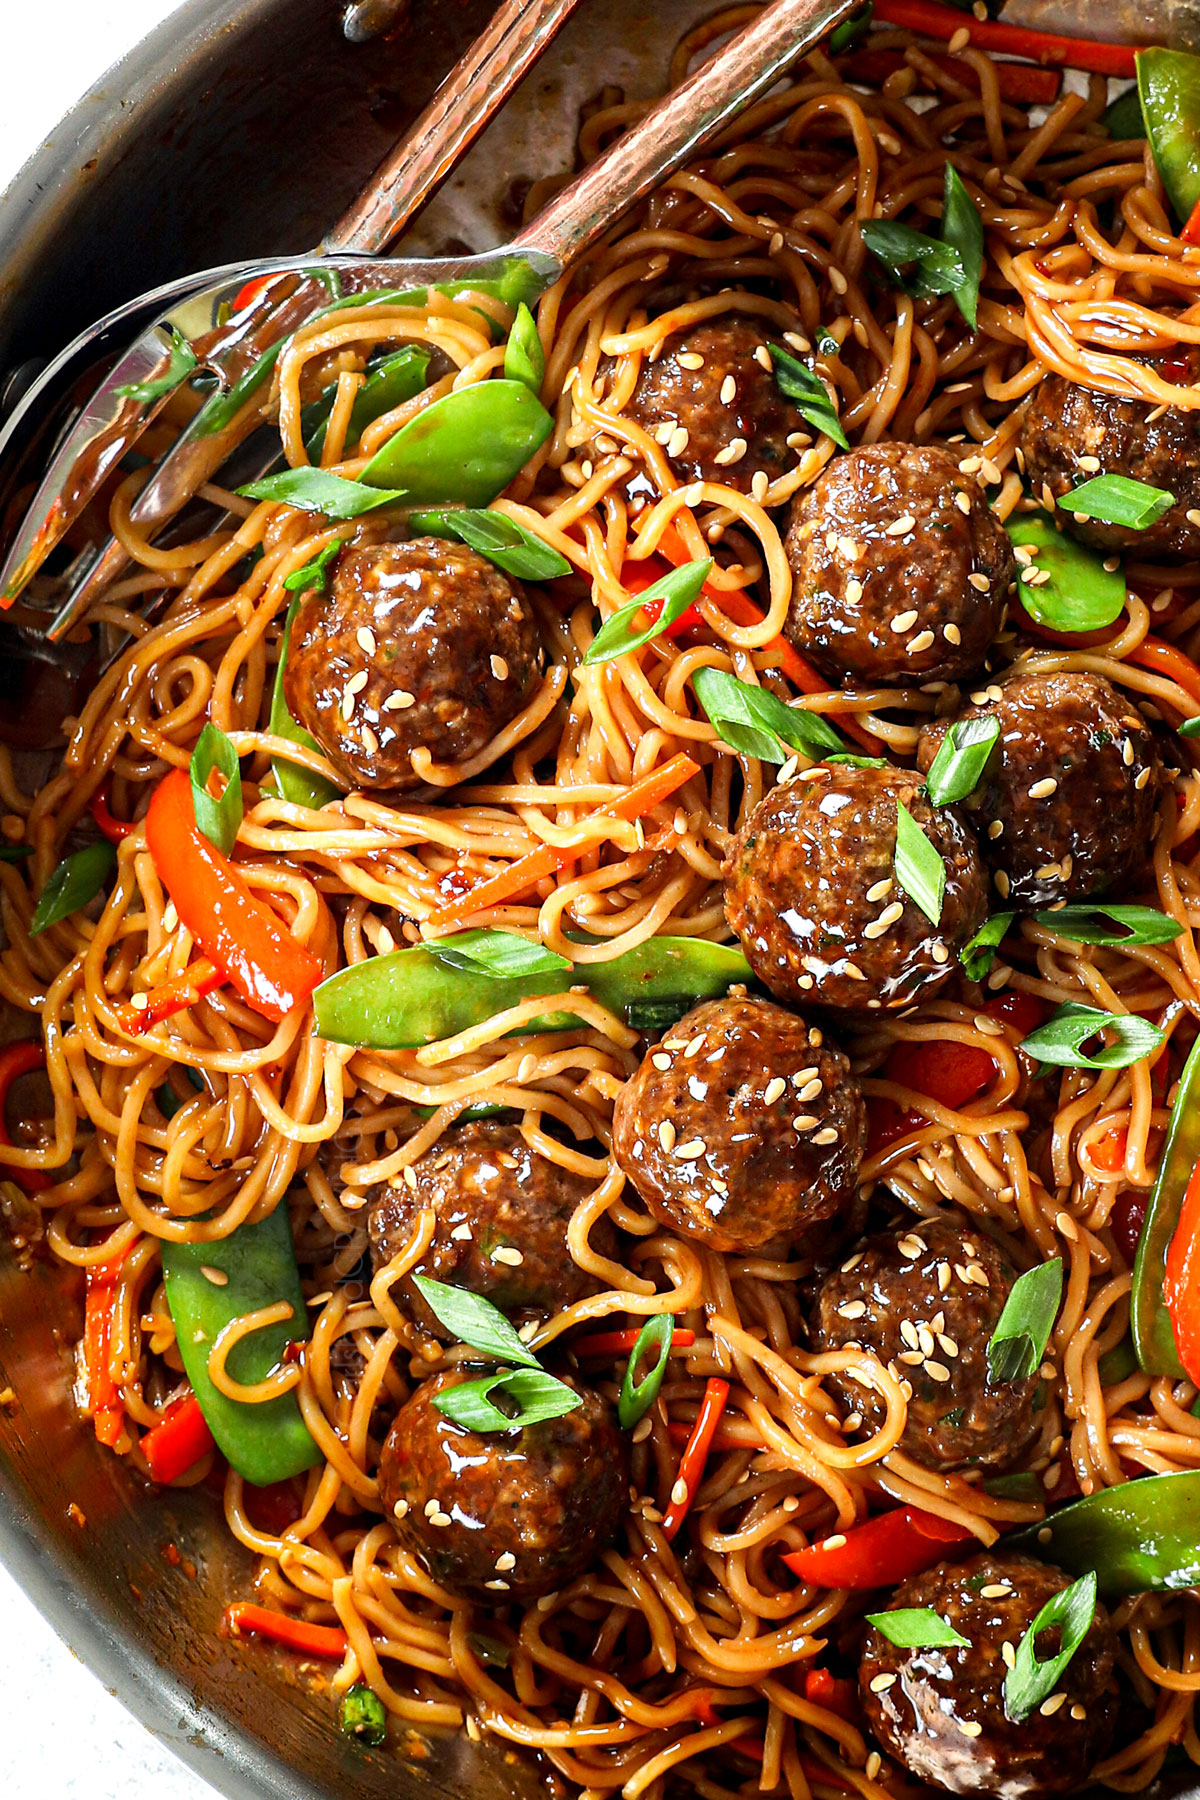 showing how to make Asian meatballs by stir frying the meatballs with sauce and vegetables